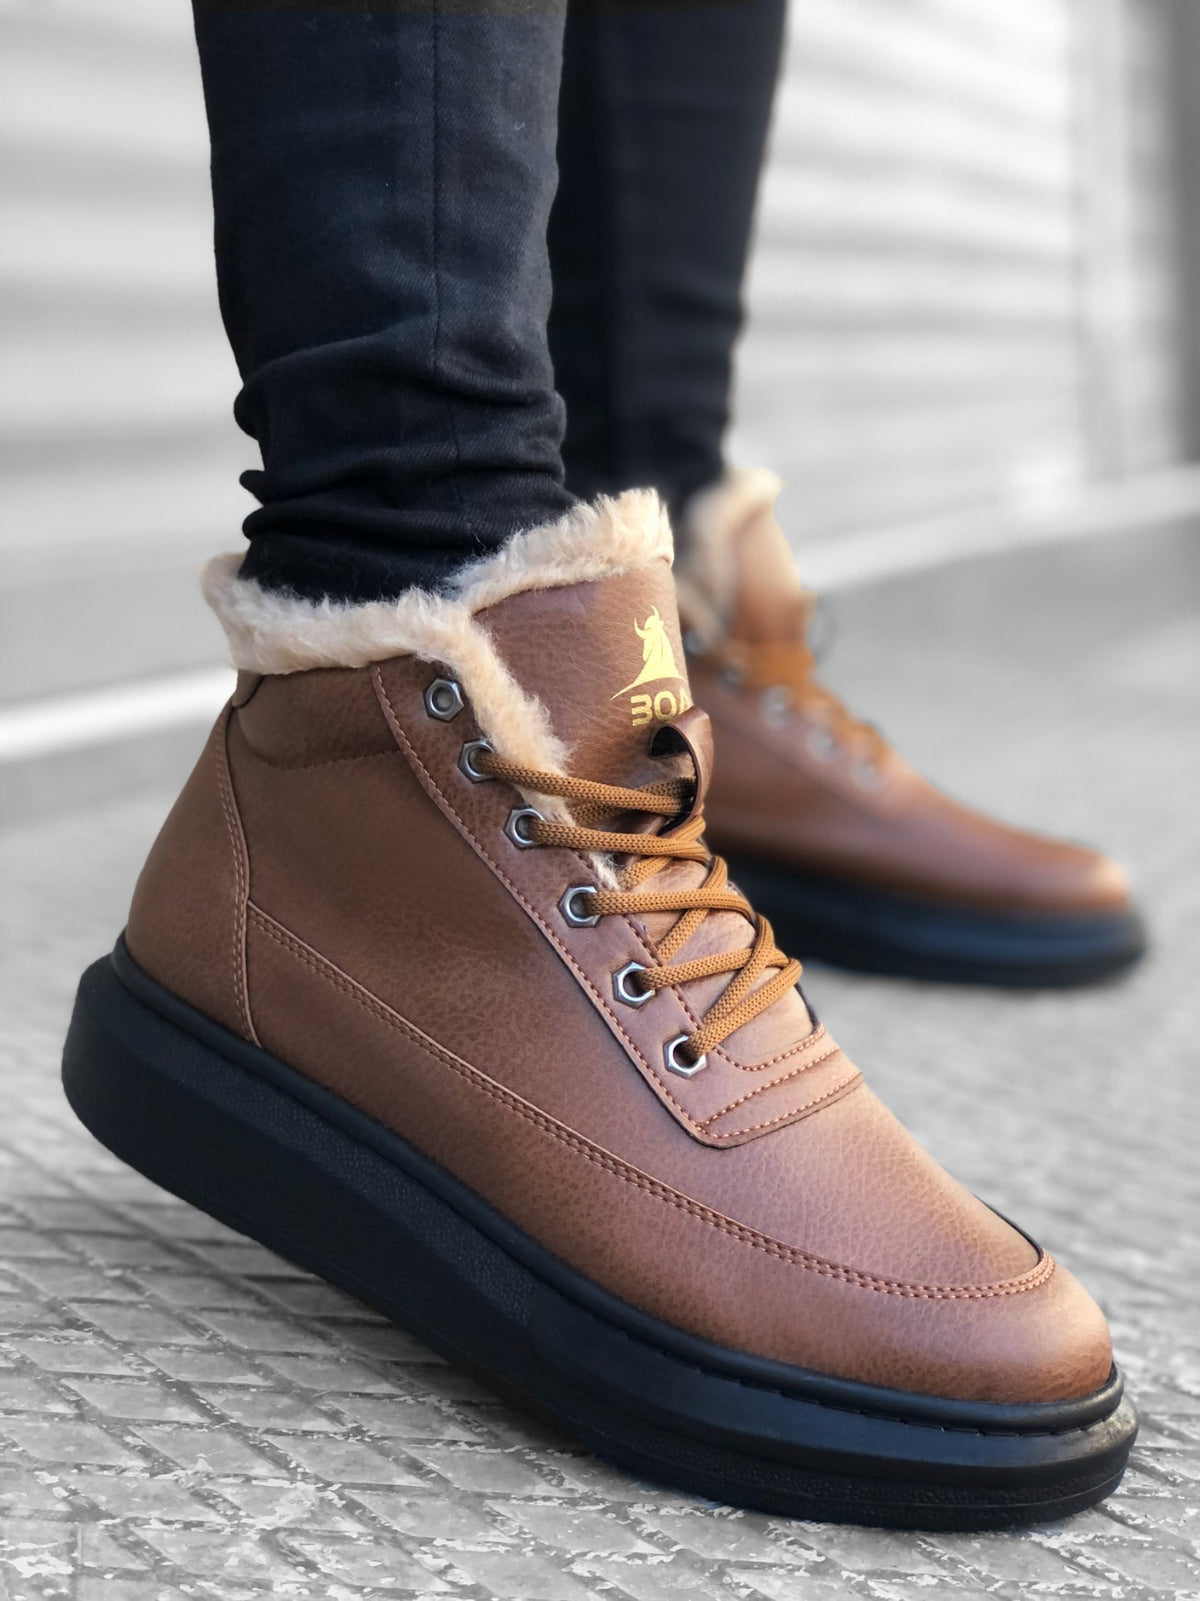 BA0151 Shearling Lace-up Tan Men's Style Sport Boots - STREETMODE™